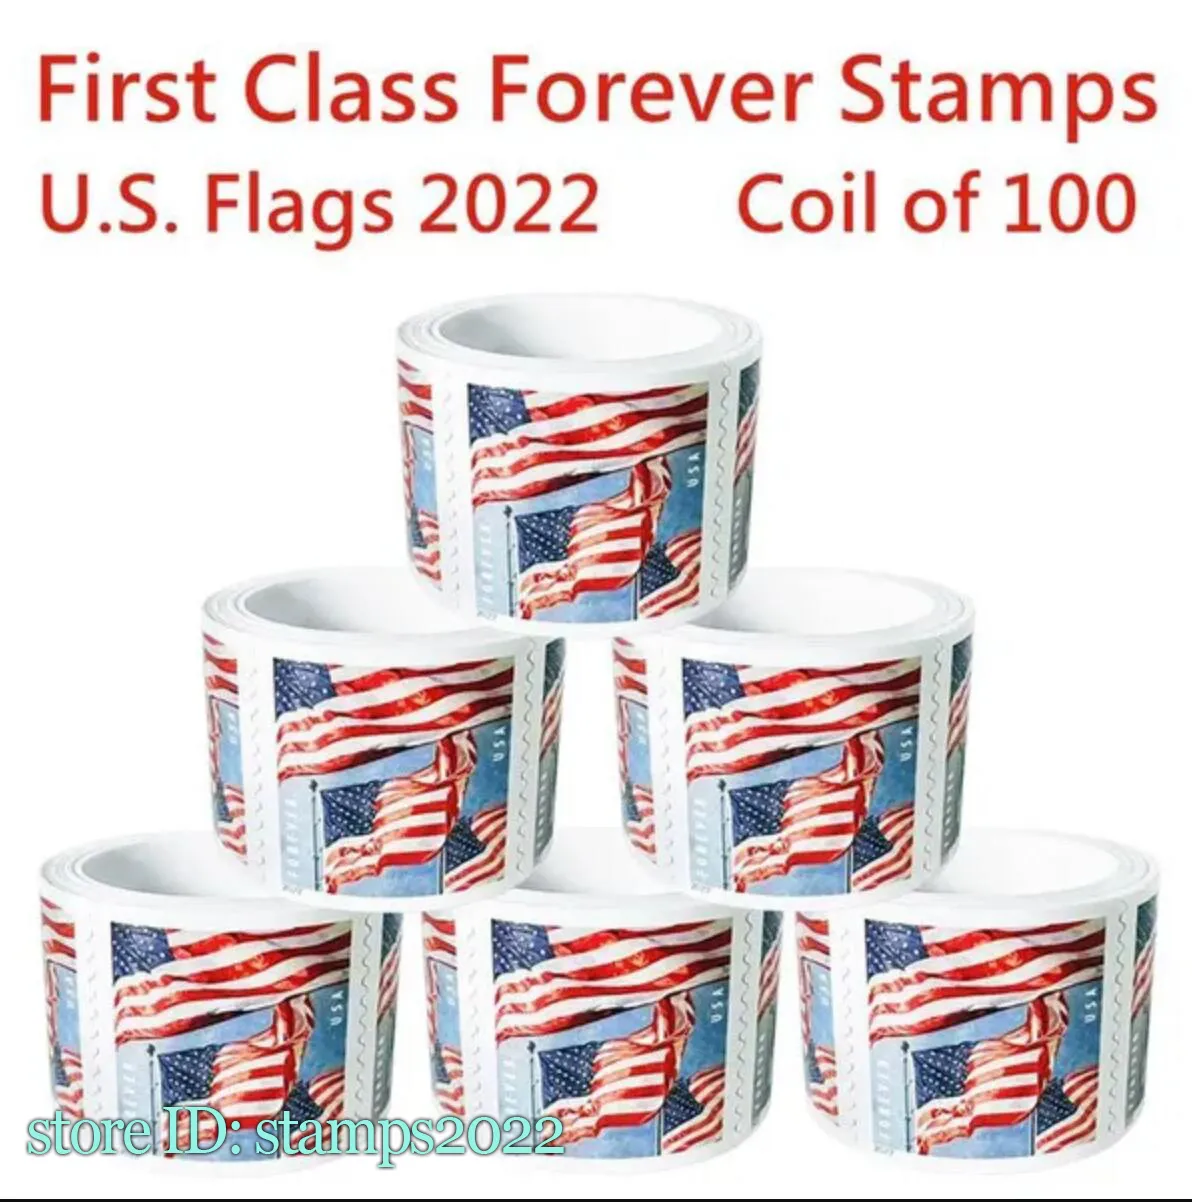 2022 Forever U.S. flag Roll of 100 first class US Postal Service For Wedding Envelopes Thank You Postcard Office Mail Supplies